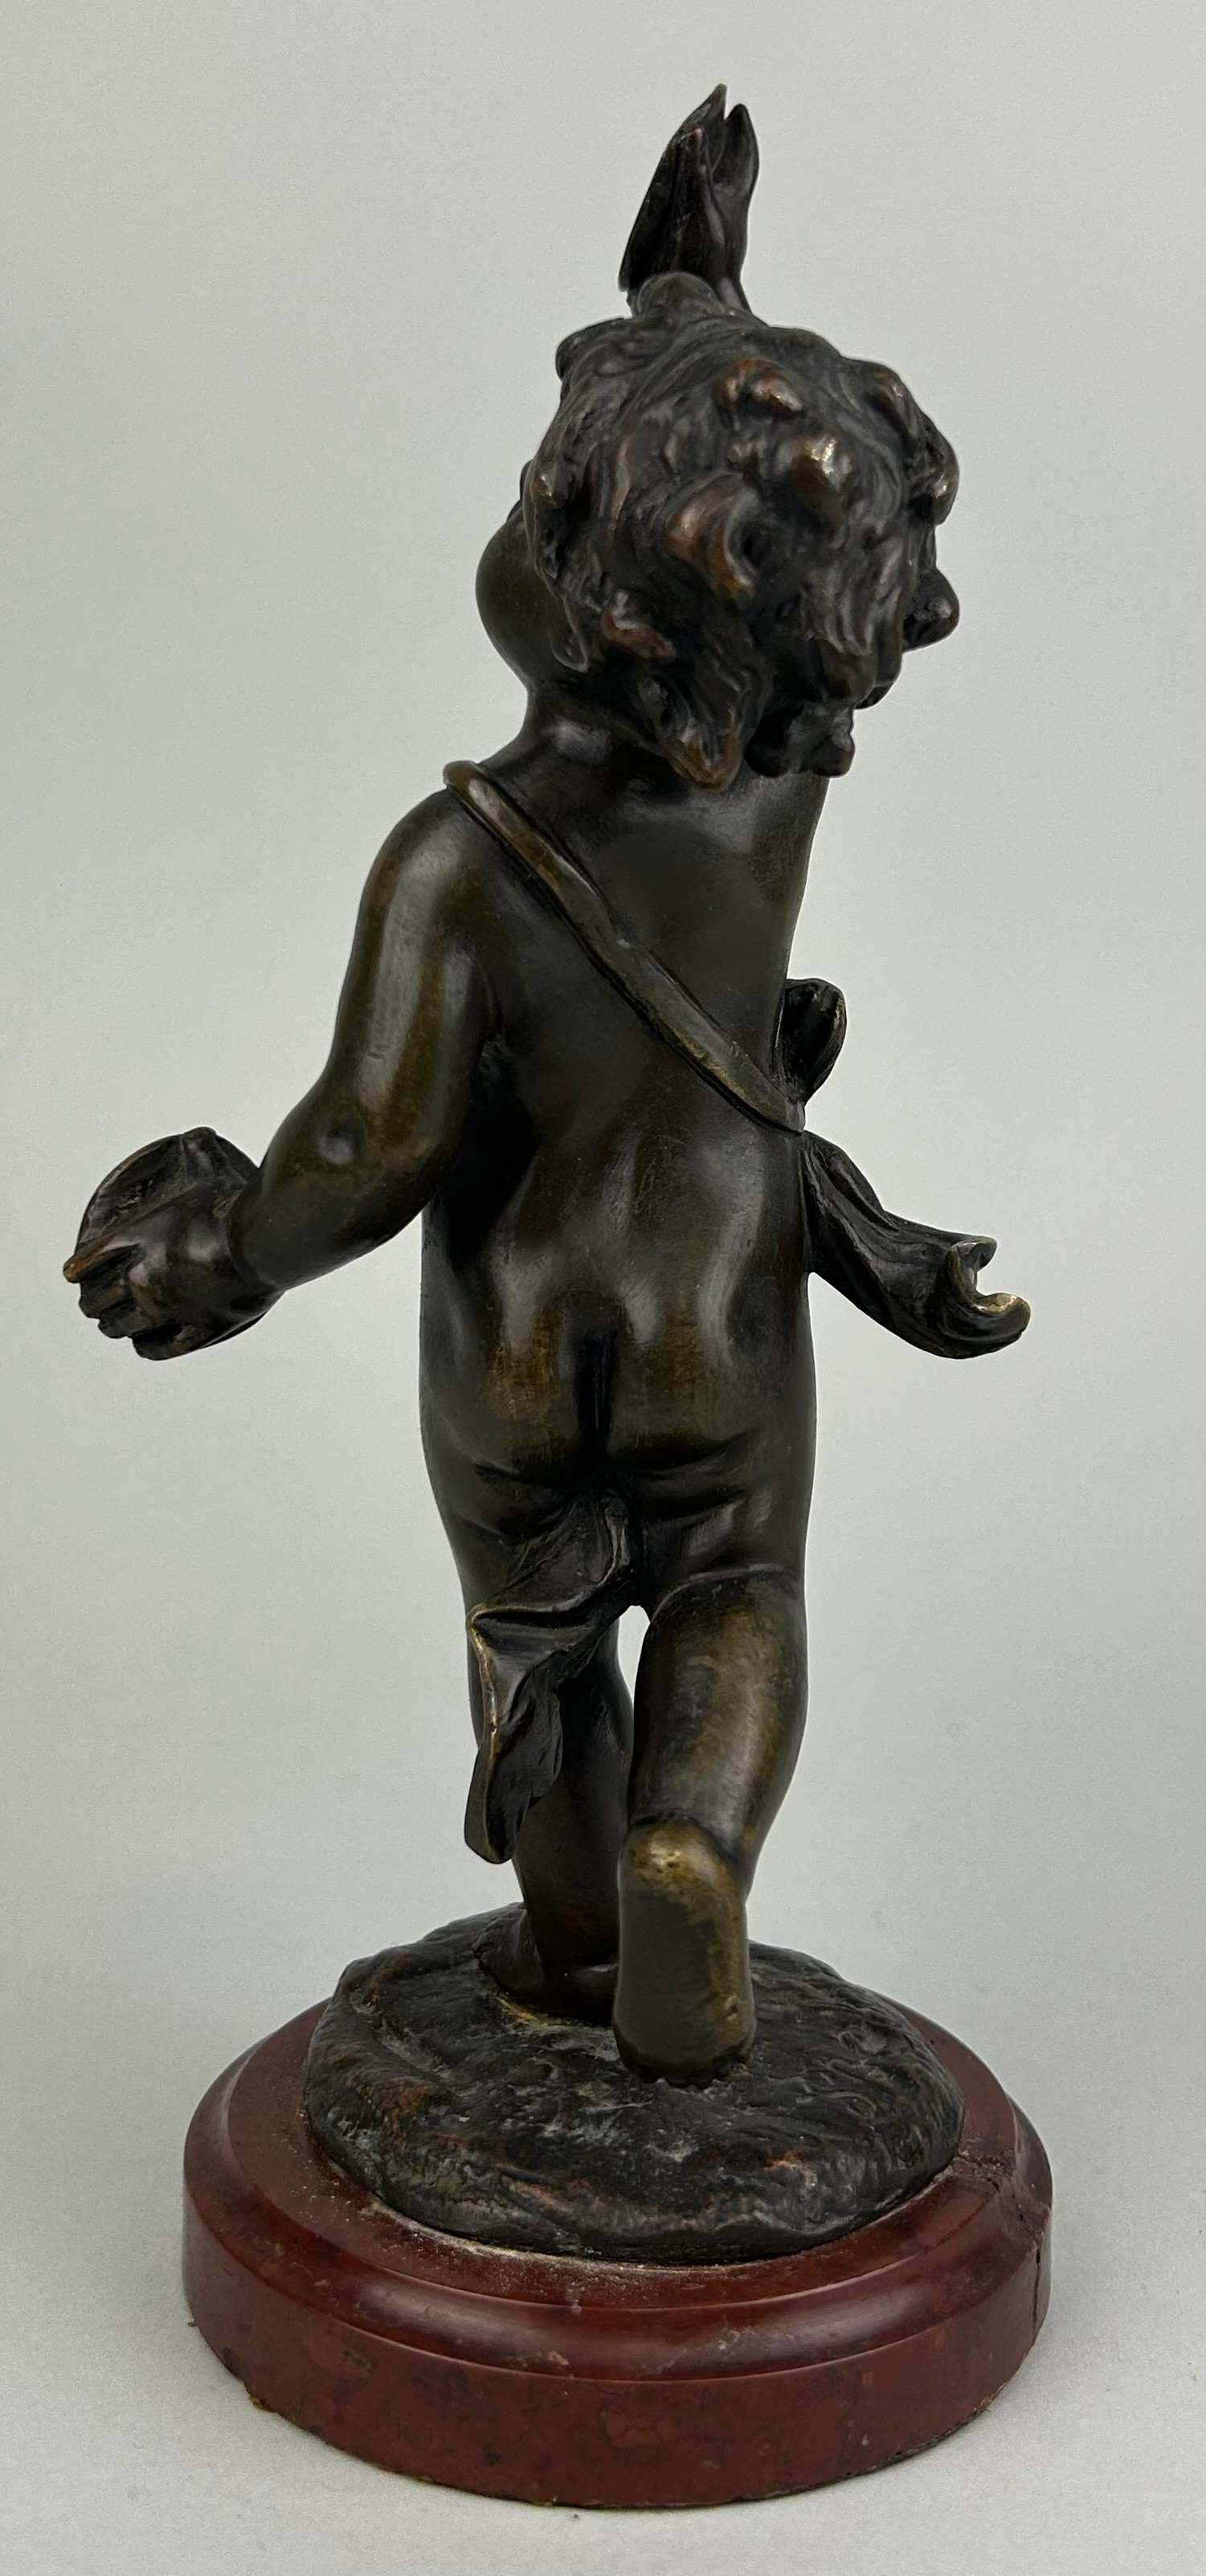 A 19TH CENTURY FRENCH BRONZE SCULPTURE OF A PUTTI AFTER CLAUDE CLODION (1738-1814) ON A RED MARBLE - Image 3 of 5